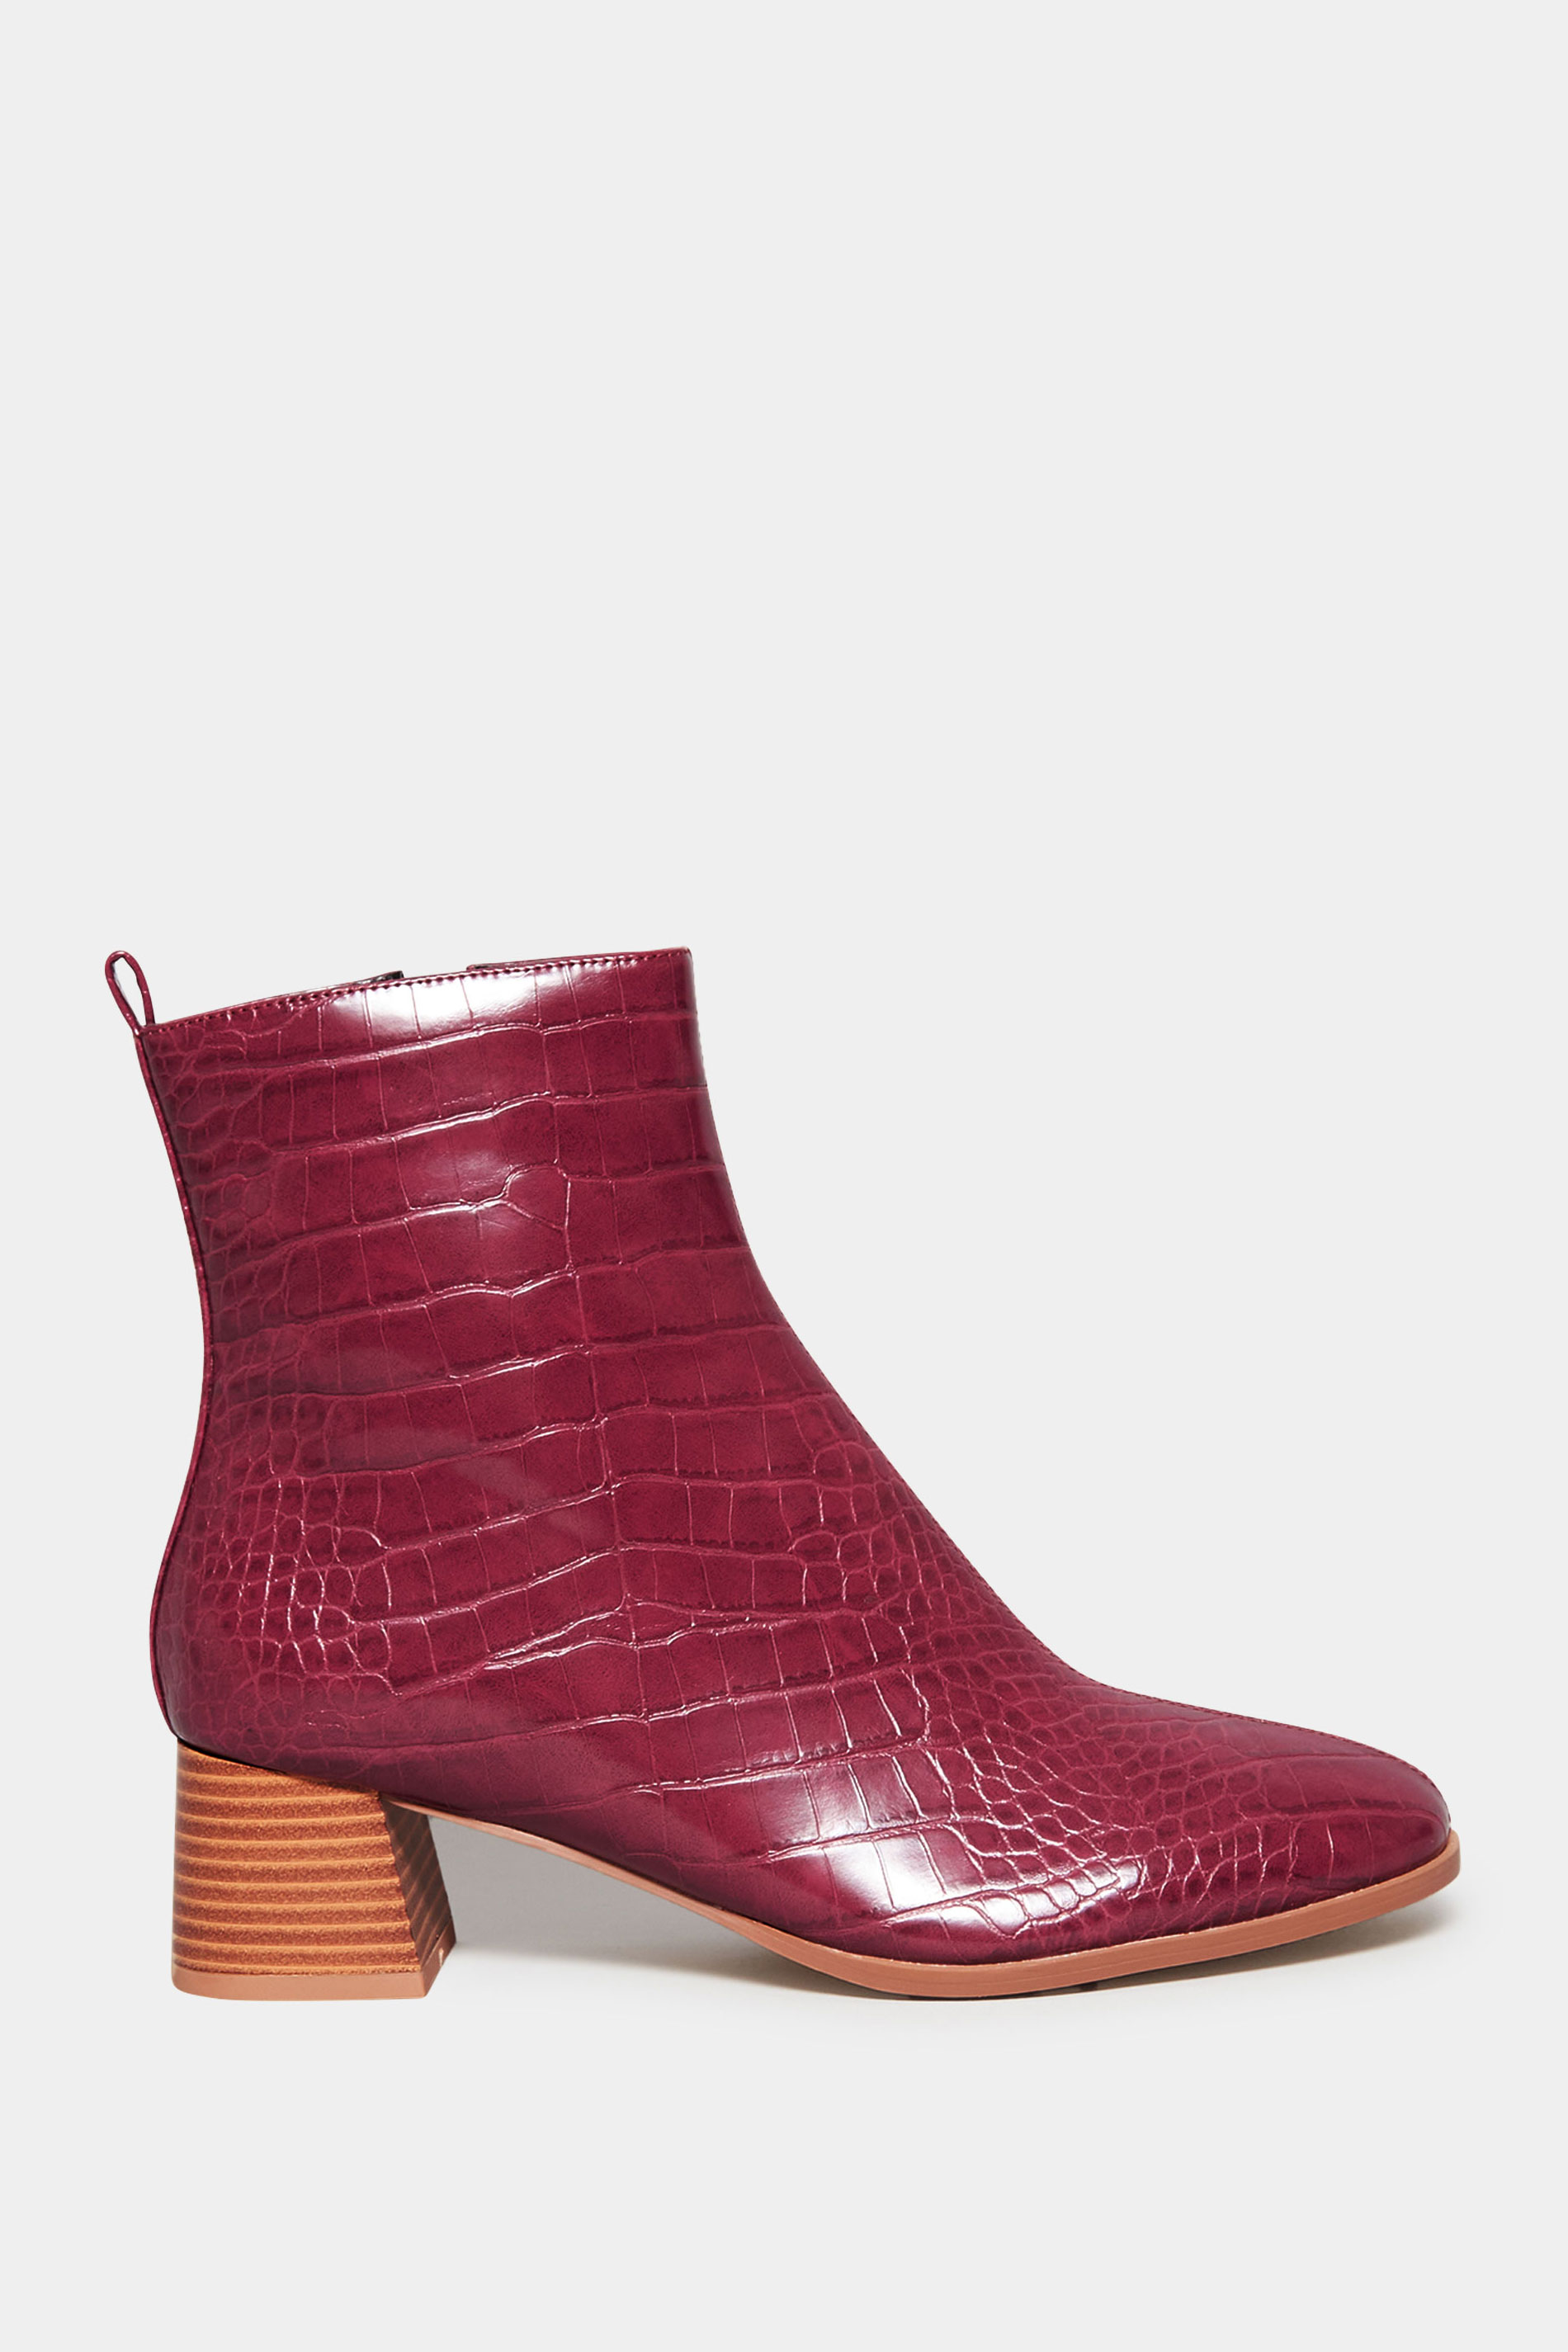 LTS Wine Red Croc Block Heel Boots In Standard Fit | Long Tall Sally 3